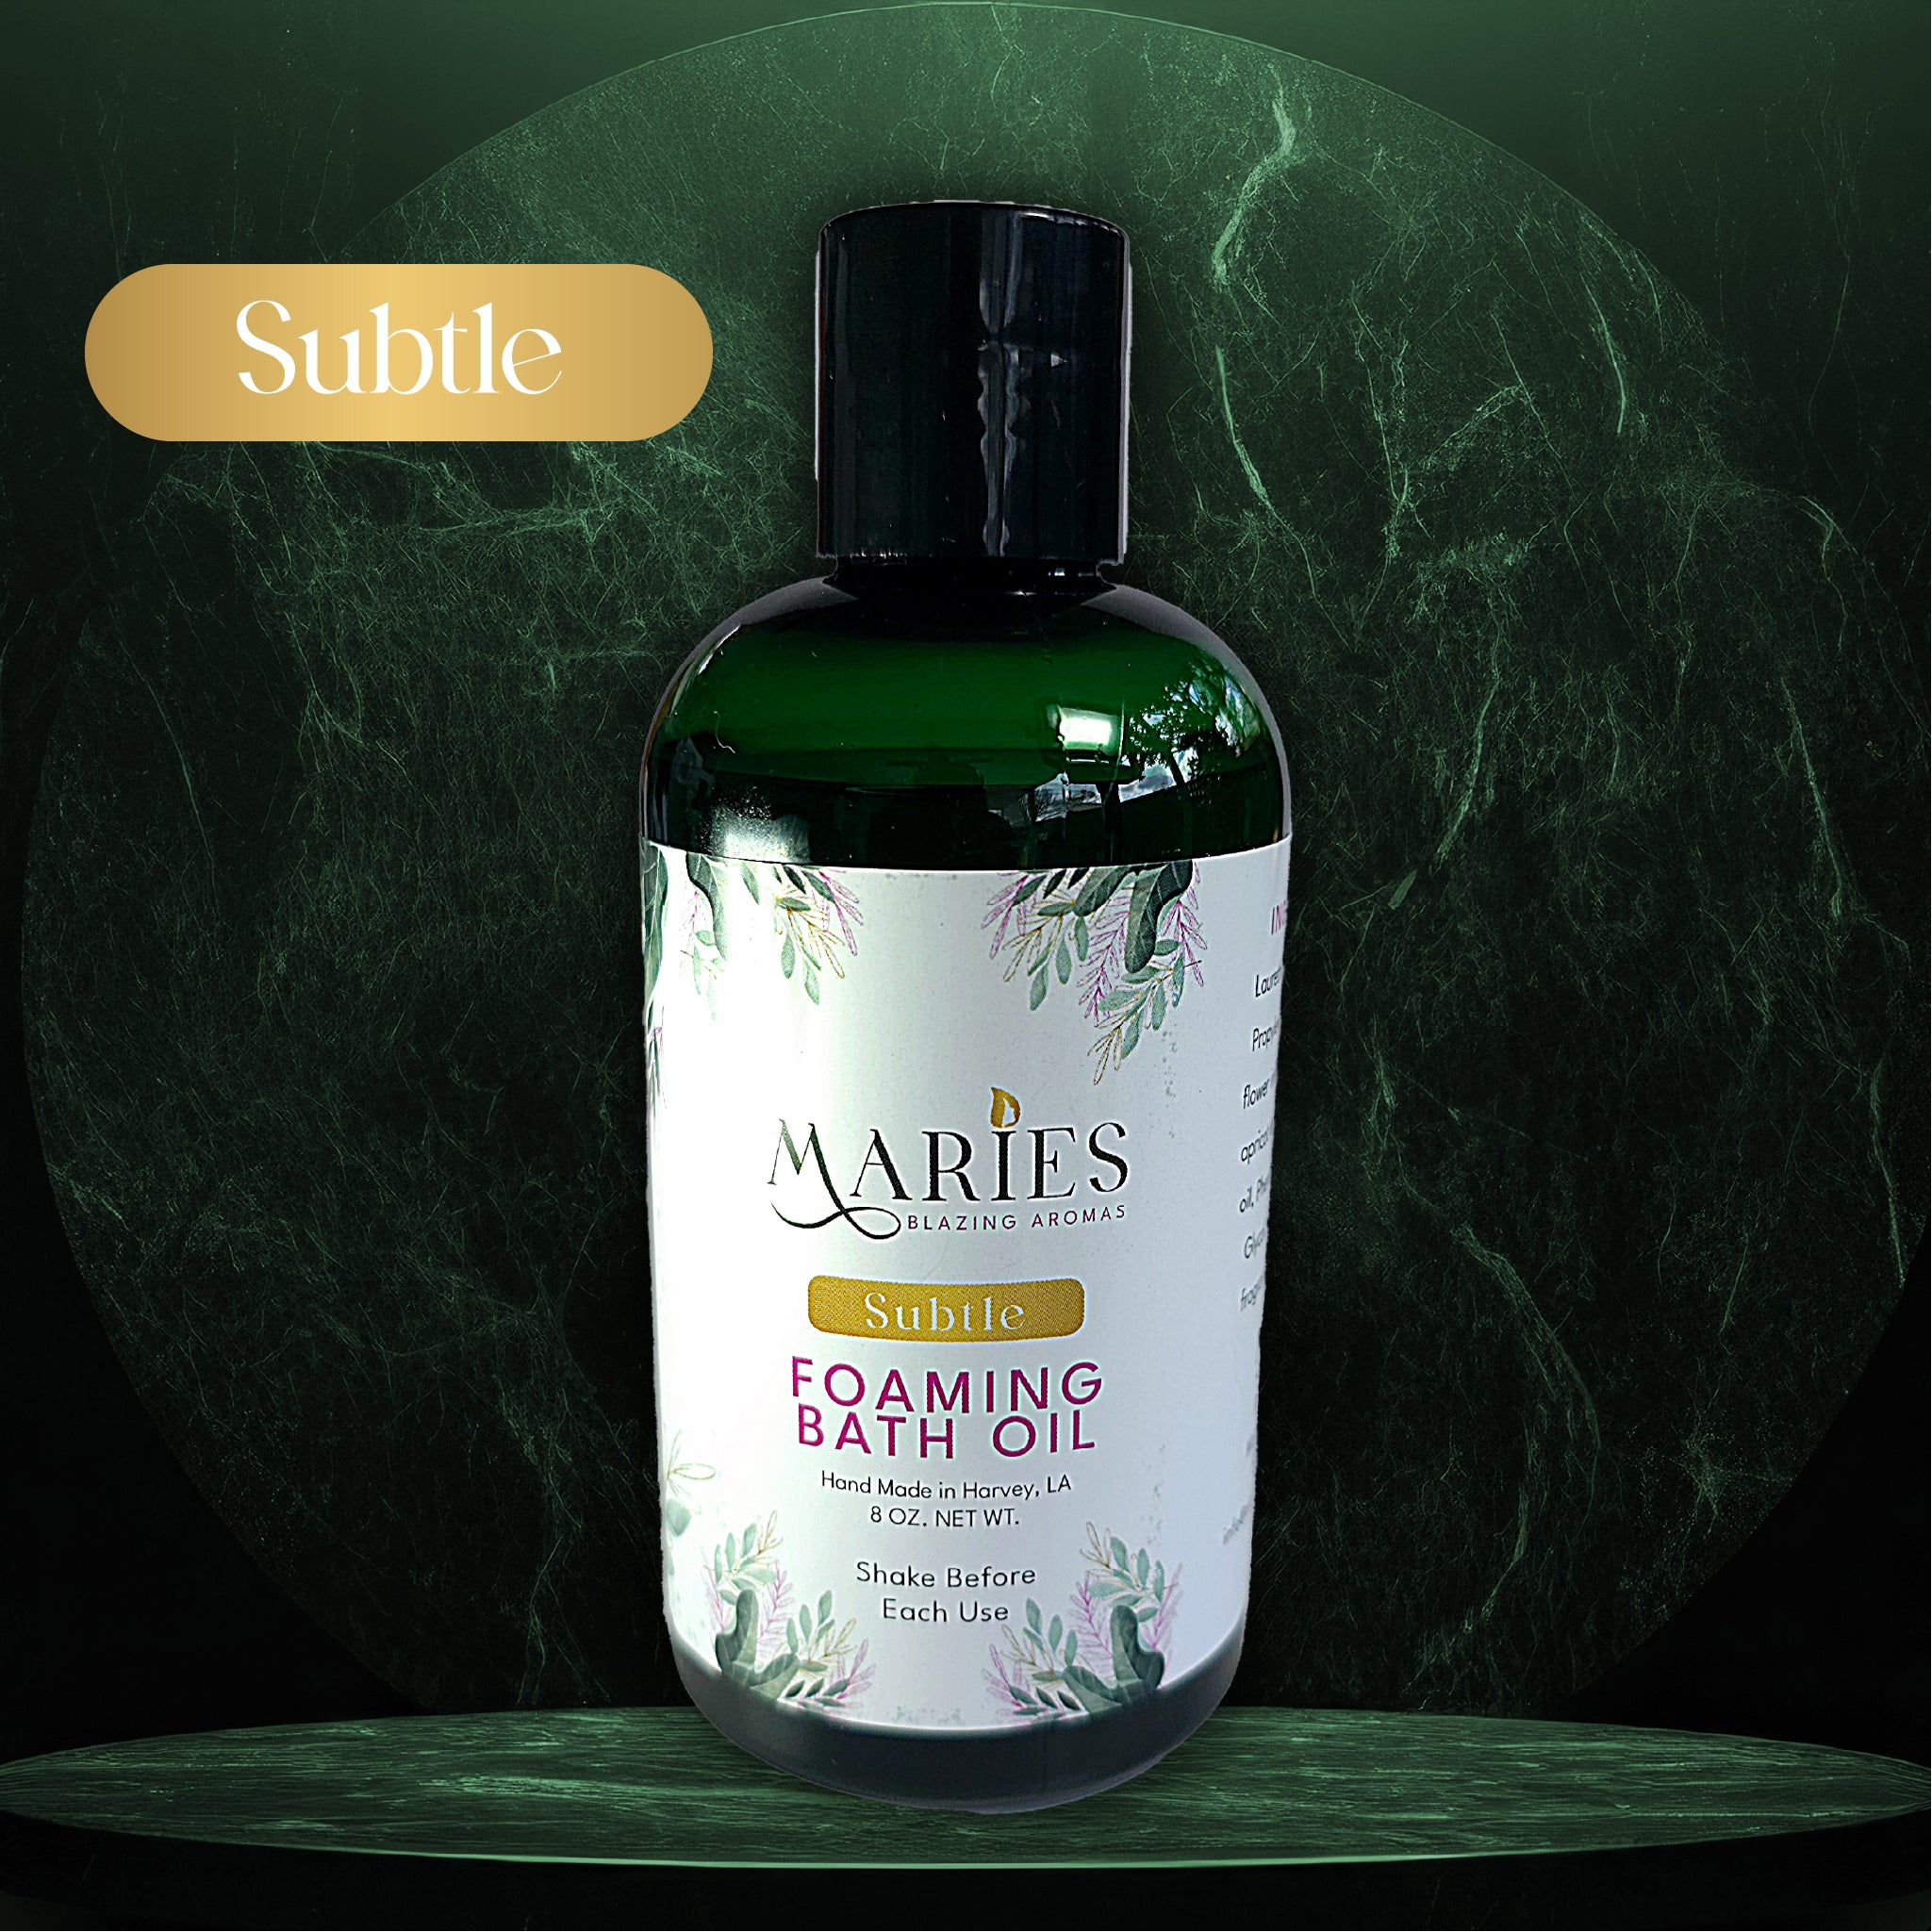 Immerse in the luxurious tranquil bath with Subtle Perfume Foaming Bath Oil - Maries Blazing Aroma